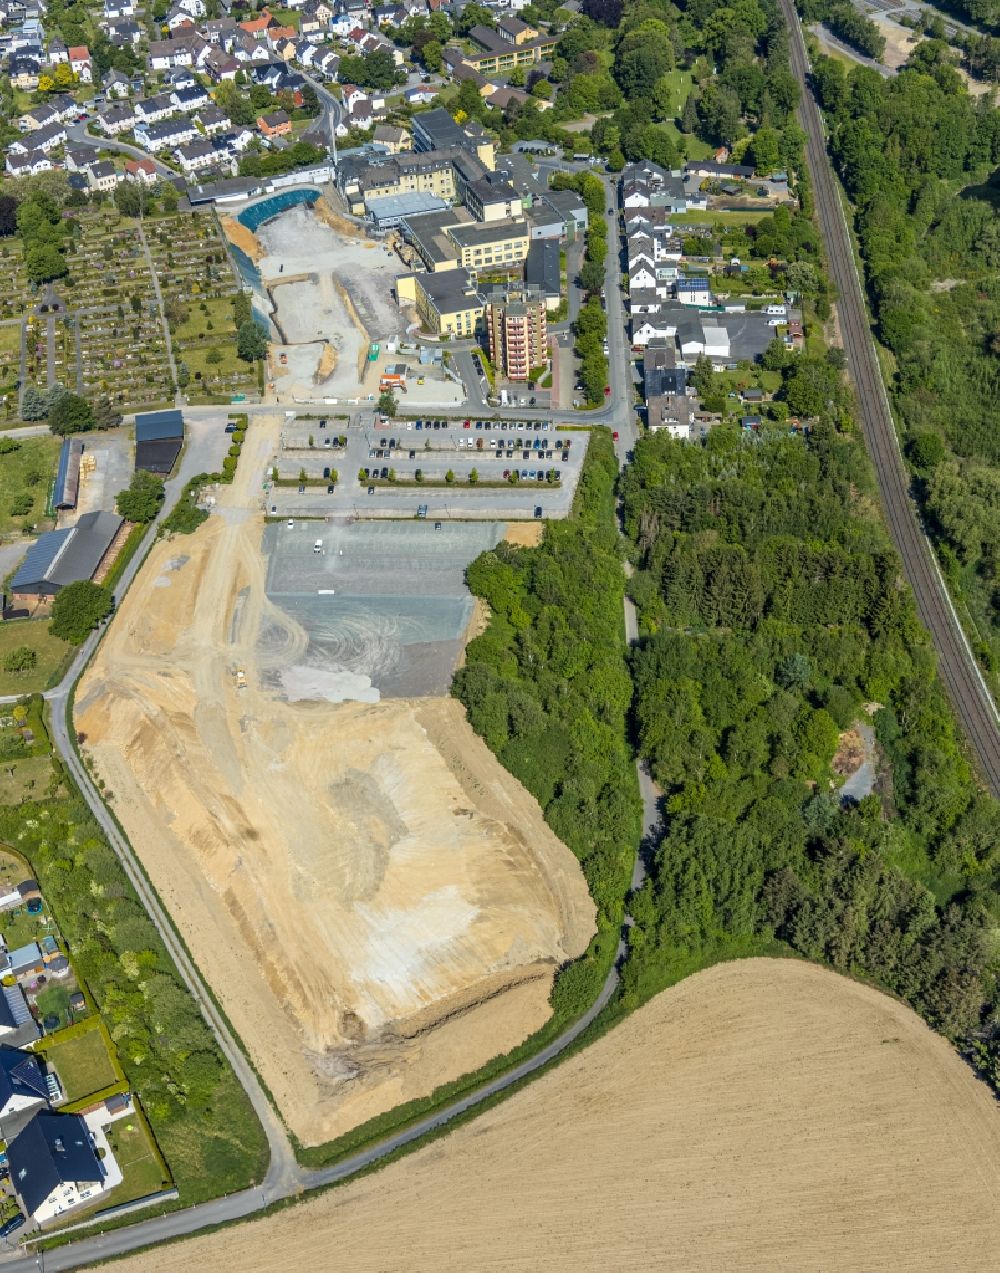 Aerial image Arnsberg - Construction site for a new extension to the hospital grounds Klinikum Hochsauerland in Arnsberg in the state North Rhine-Westphalia, Germany